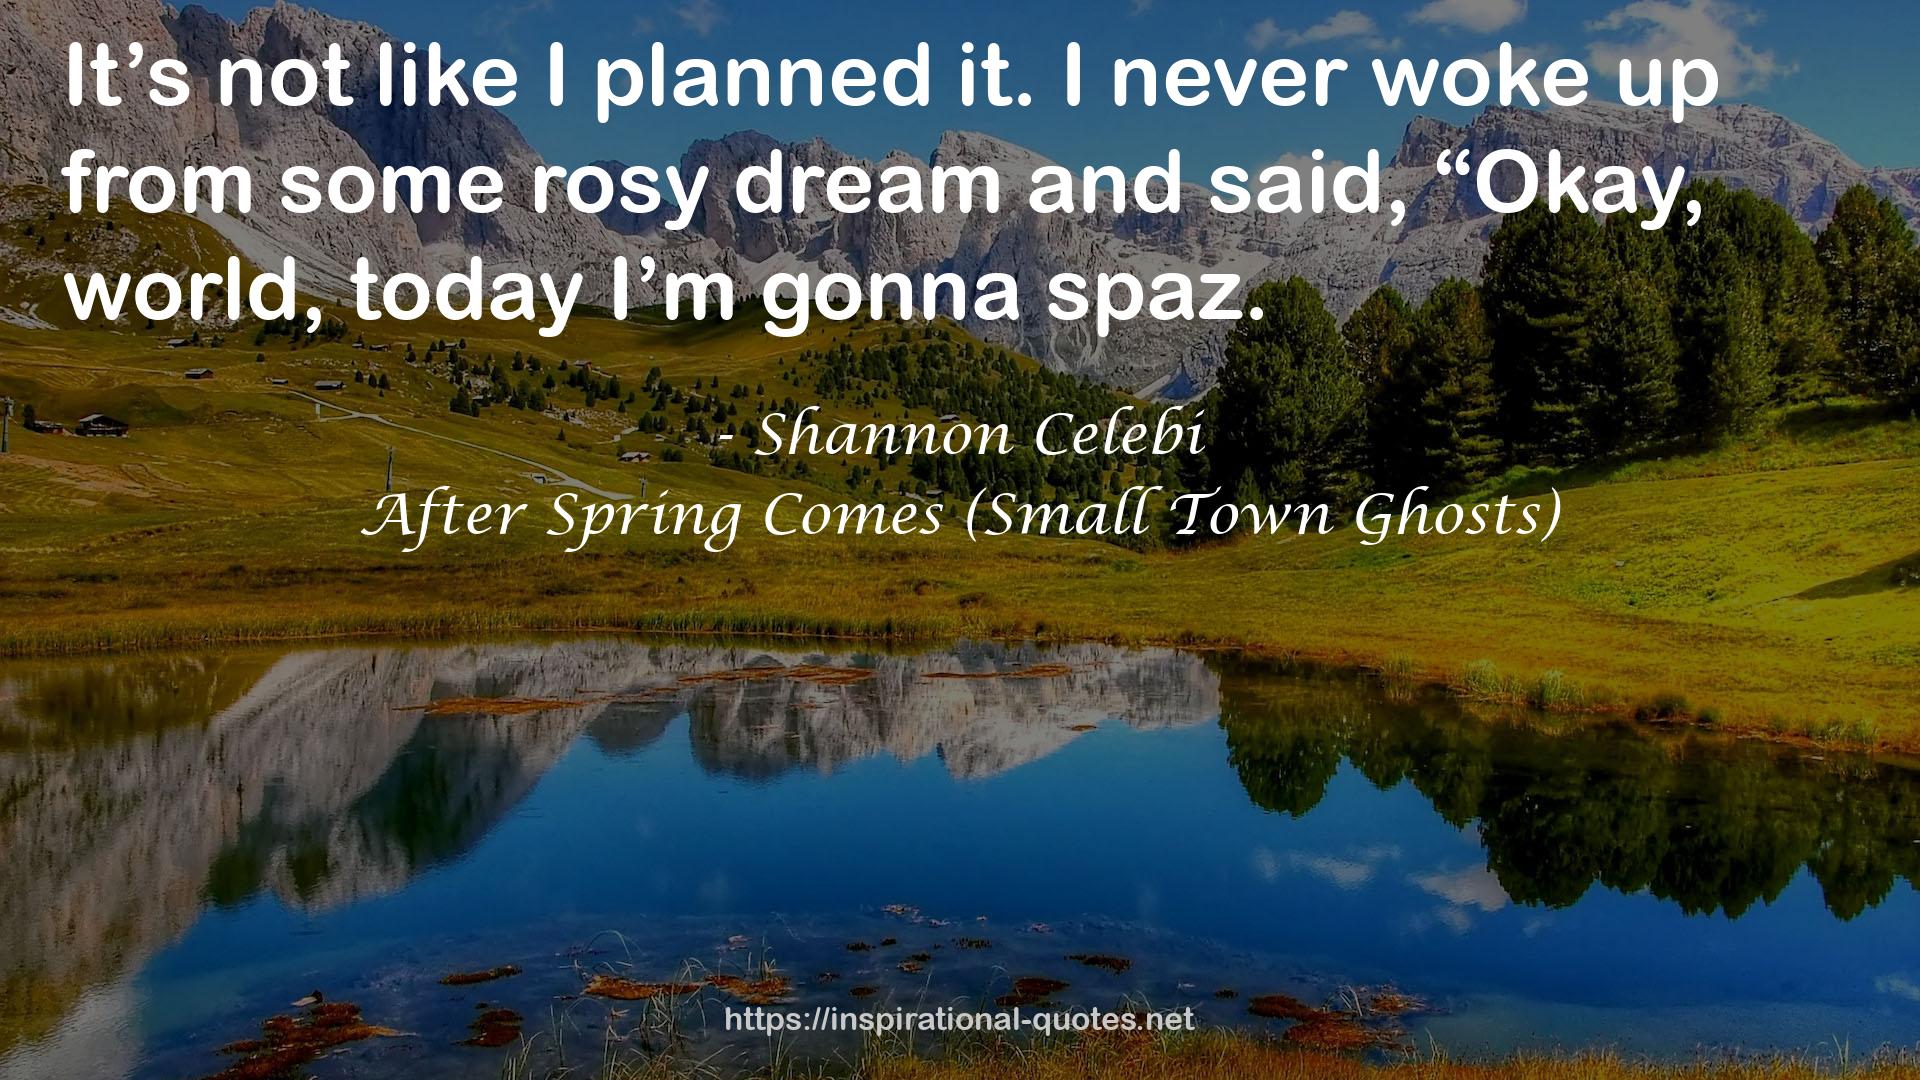 After Spring Comes (Small Town Ghosts) QUOTES